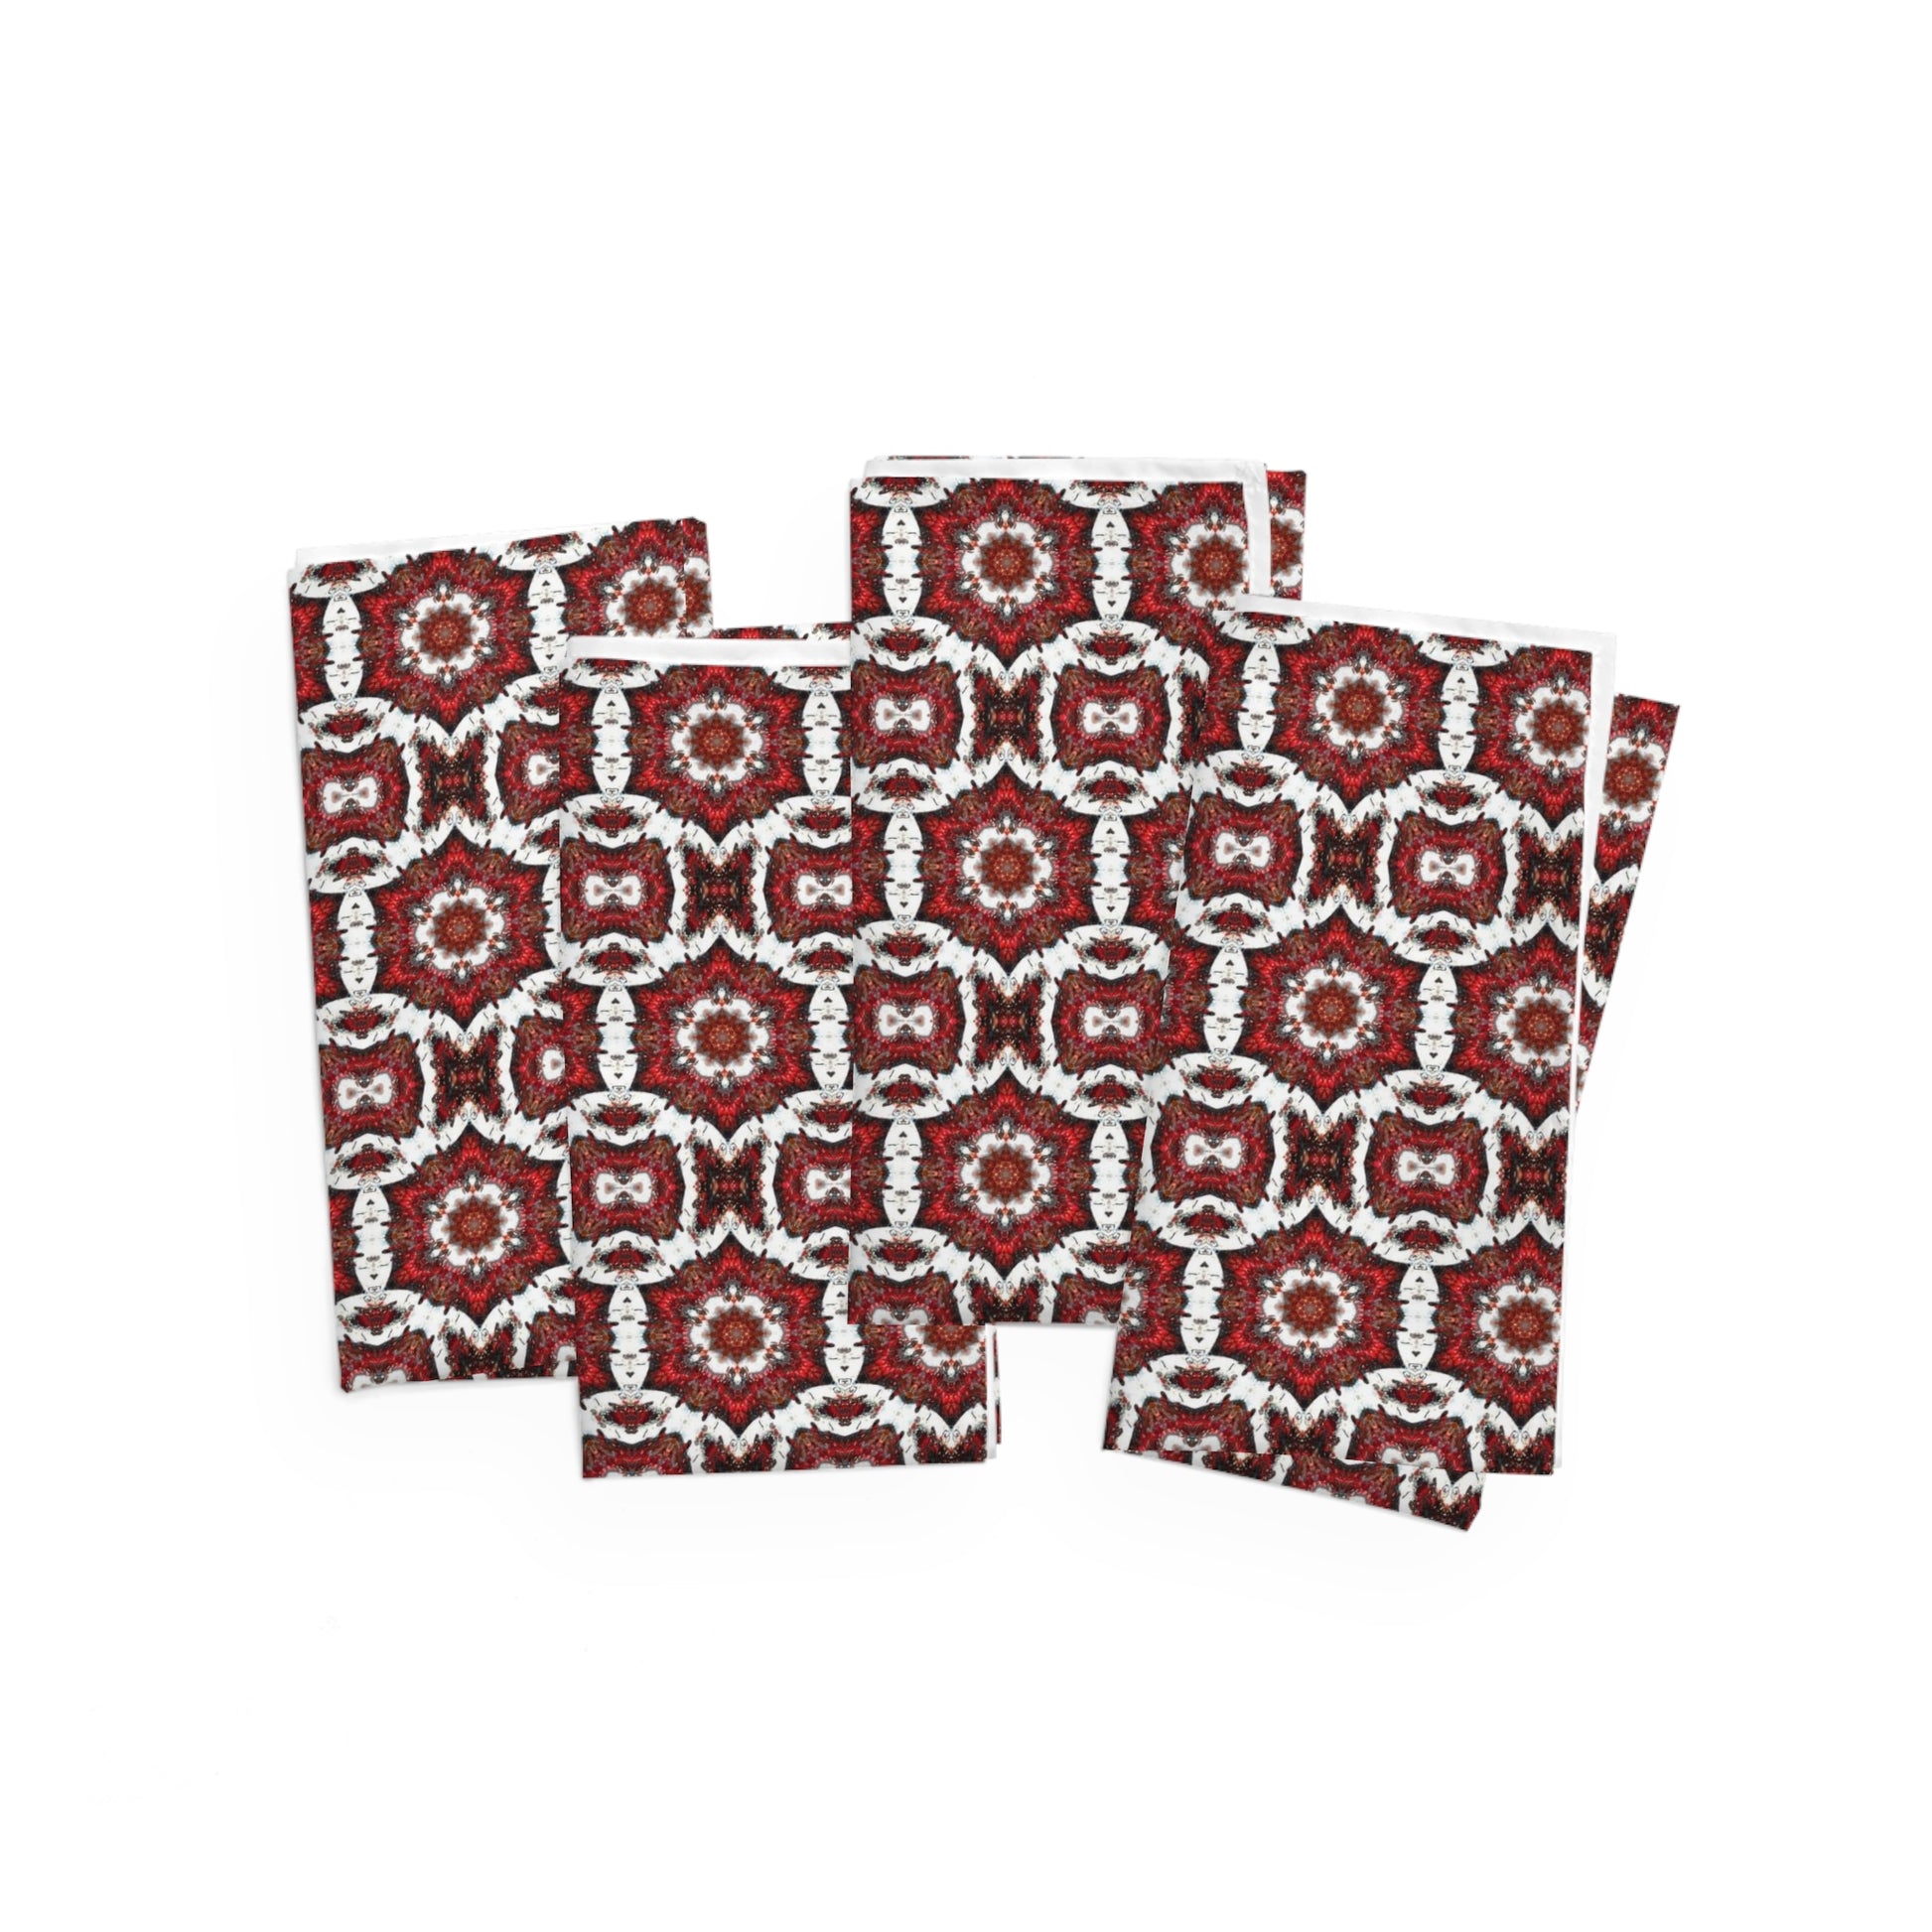 Set of 4 red and white cloth napkins